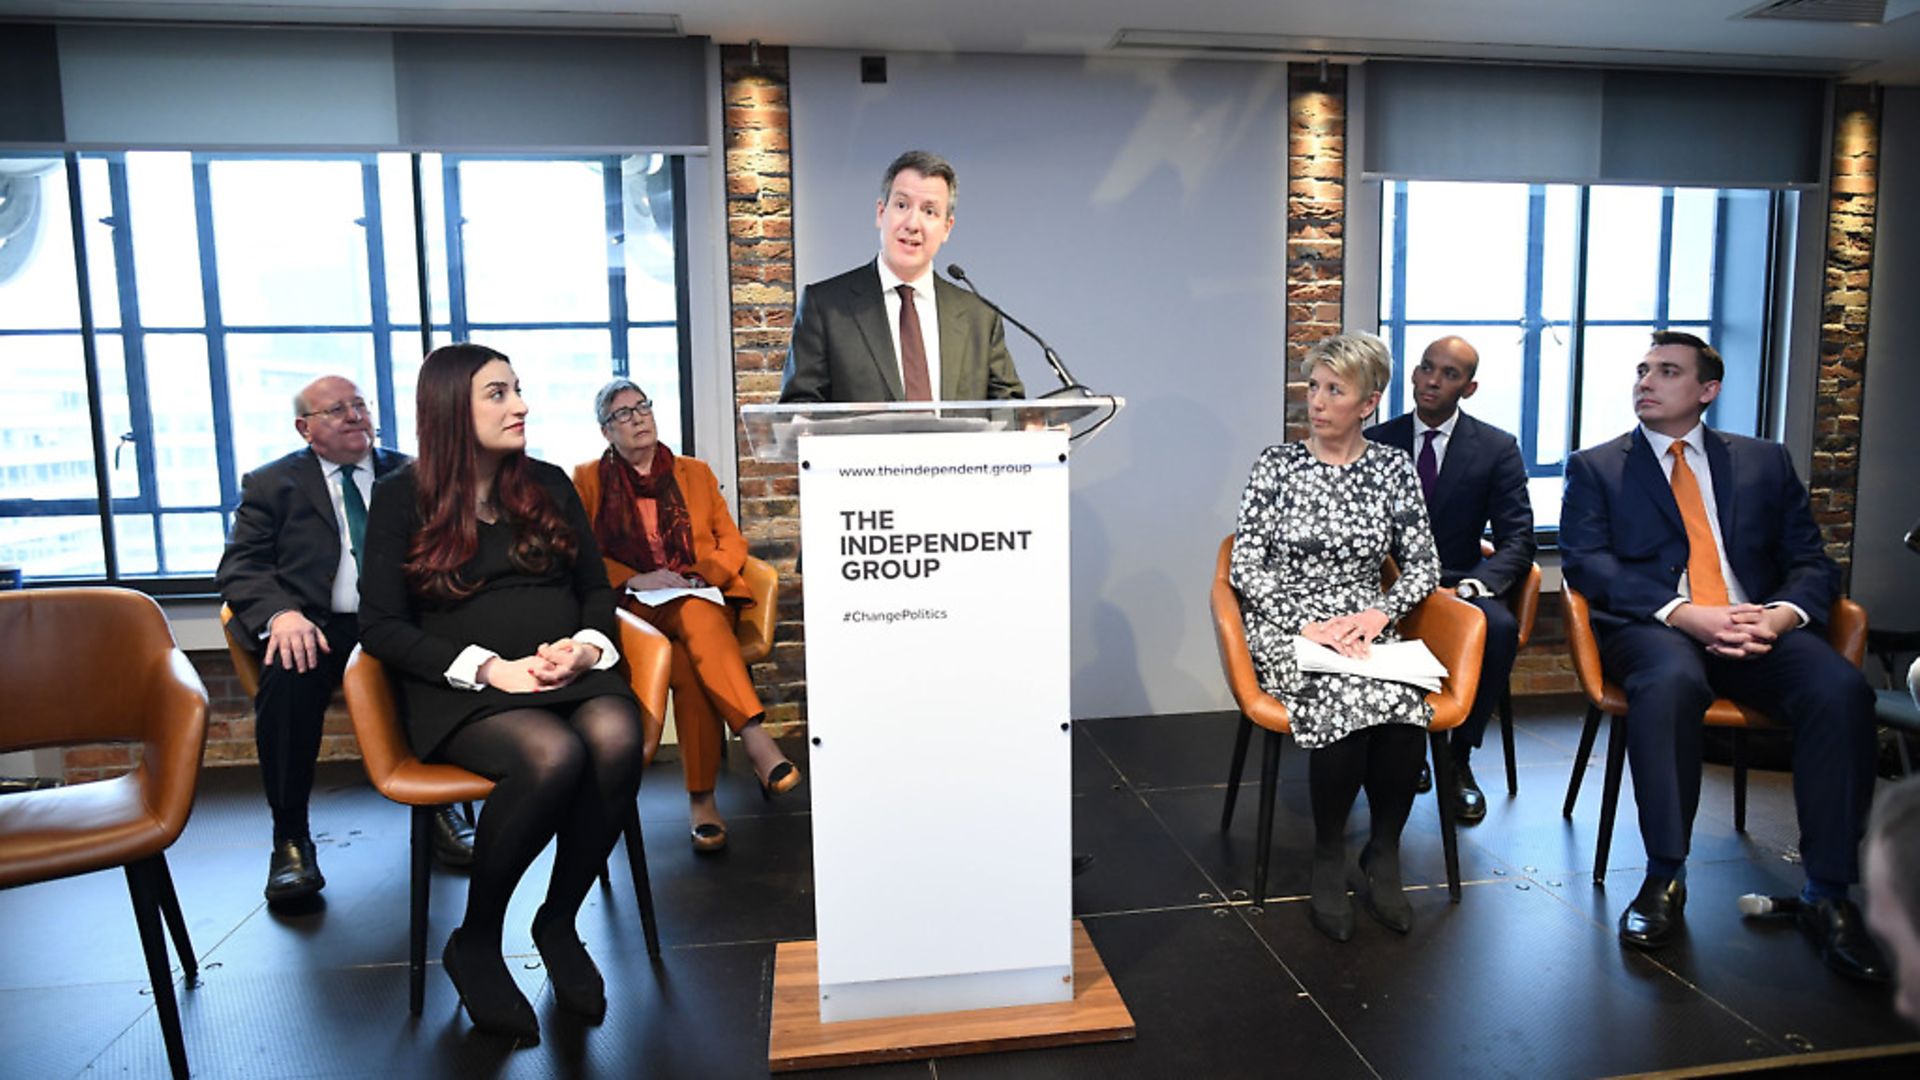 Labour MP Chris Leslie who has announced his resignation during a press conference along with a group of six other Labour MPs, including, Luciana Berger, Chuka Umunna, Gavin Shuker, Angela Smith and Mike Gapes and Ann Coffey. Photograph: Stefan Rousseau/PA Wire - Credit: PA